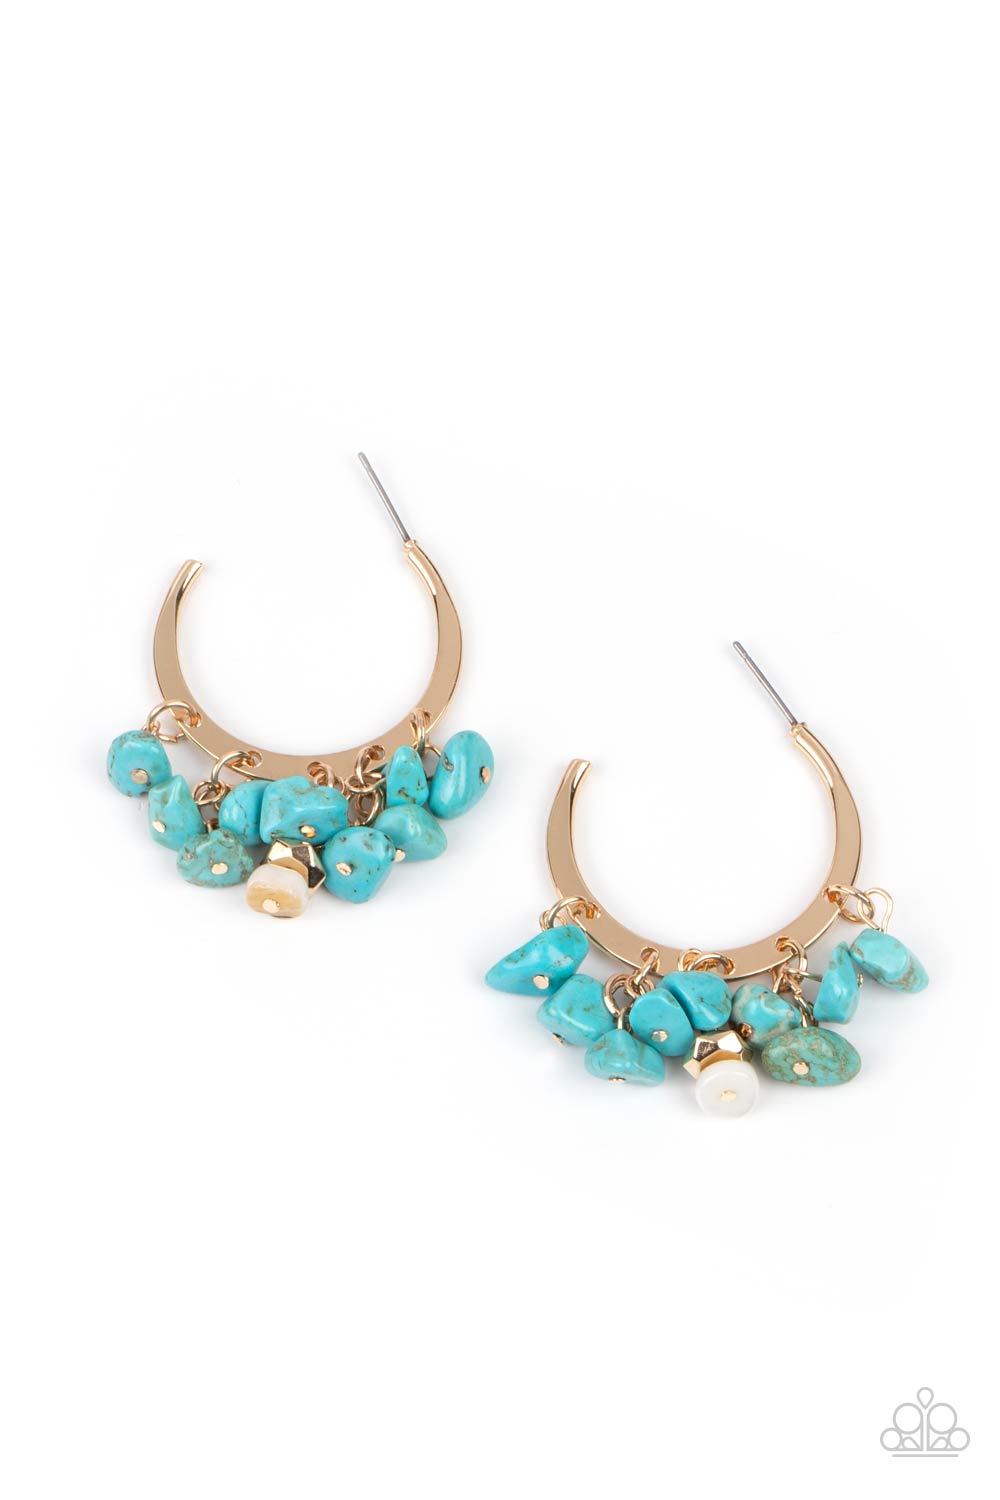 Gorgeously Grounding - Gold, Blue & White Stone Hoop Earrings - Princess Glam Shop